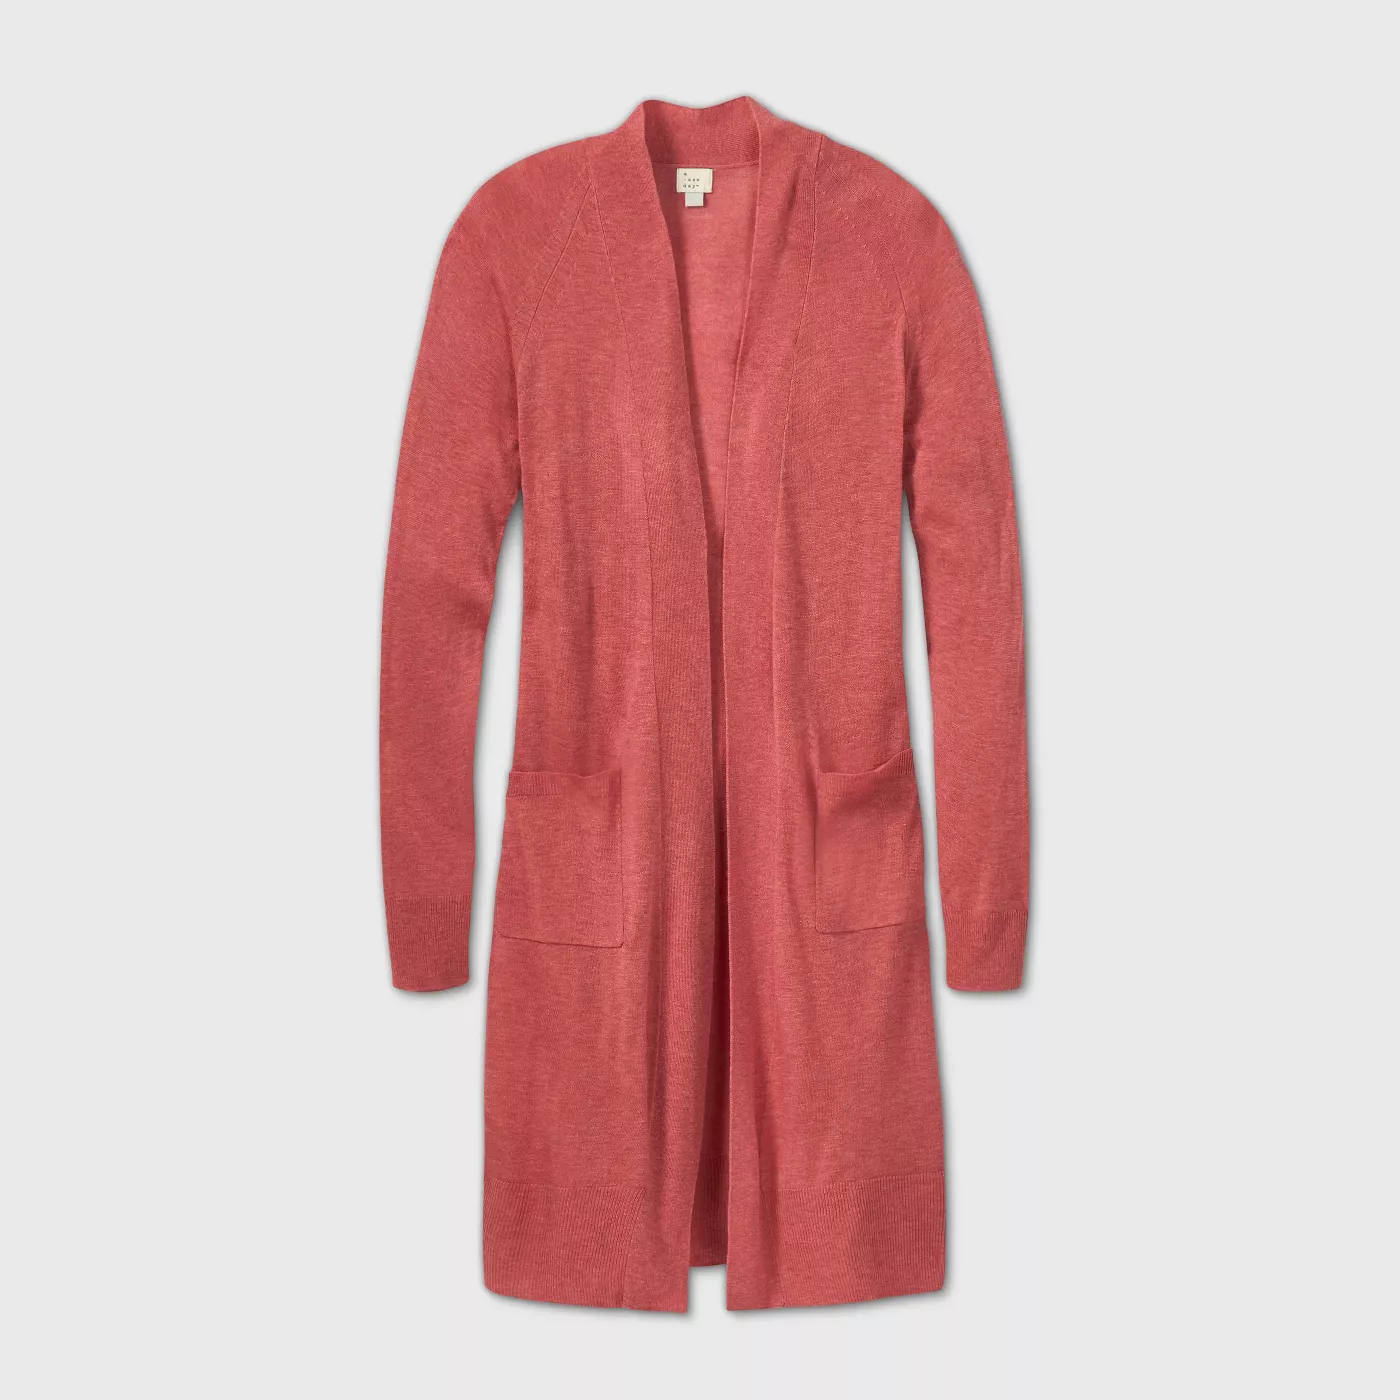 Women's Linen Blend Duster Cardigan - A New Day™ - image 1 of 7